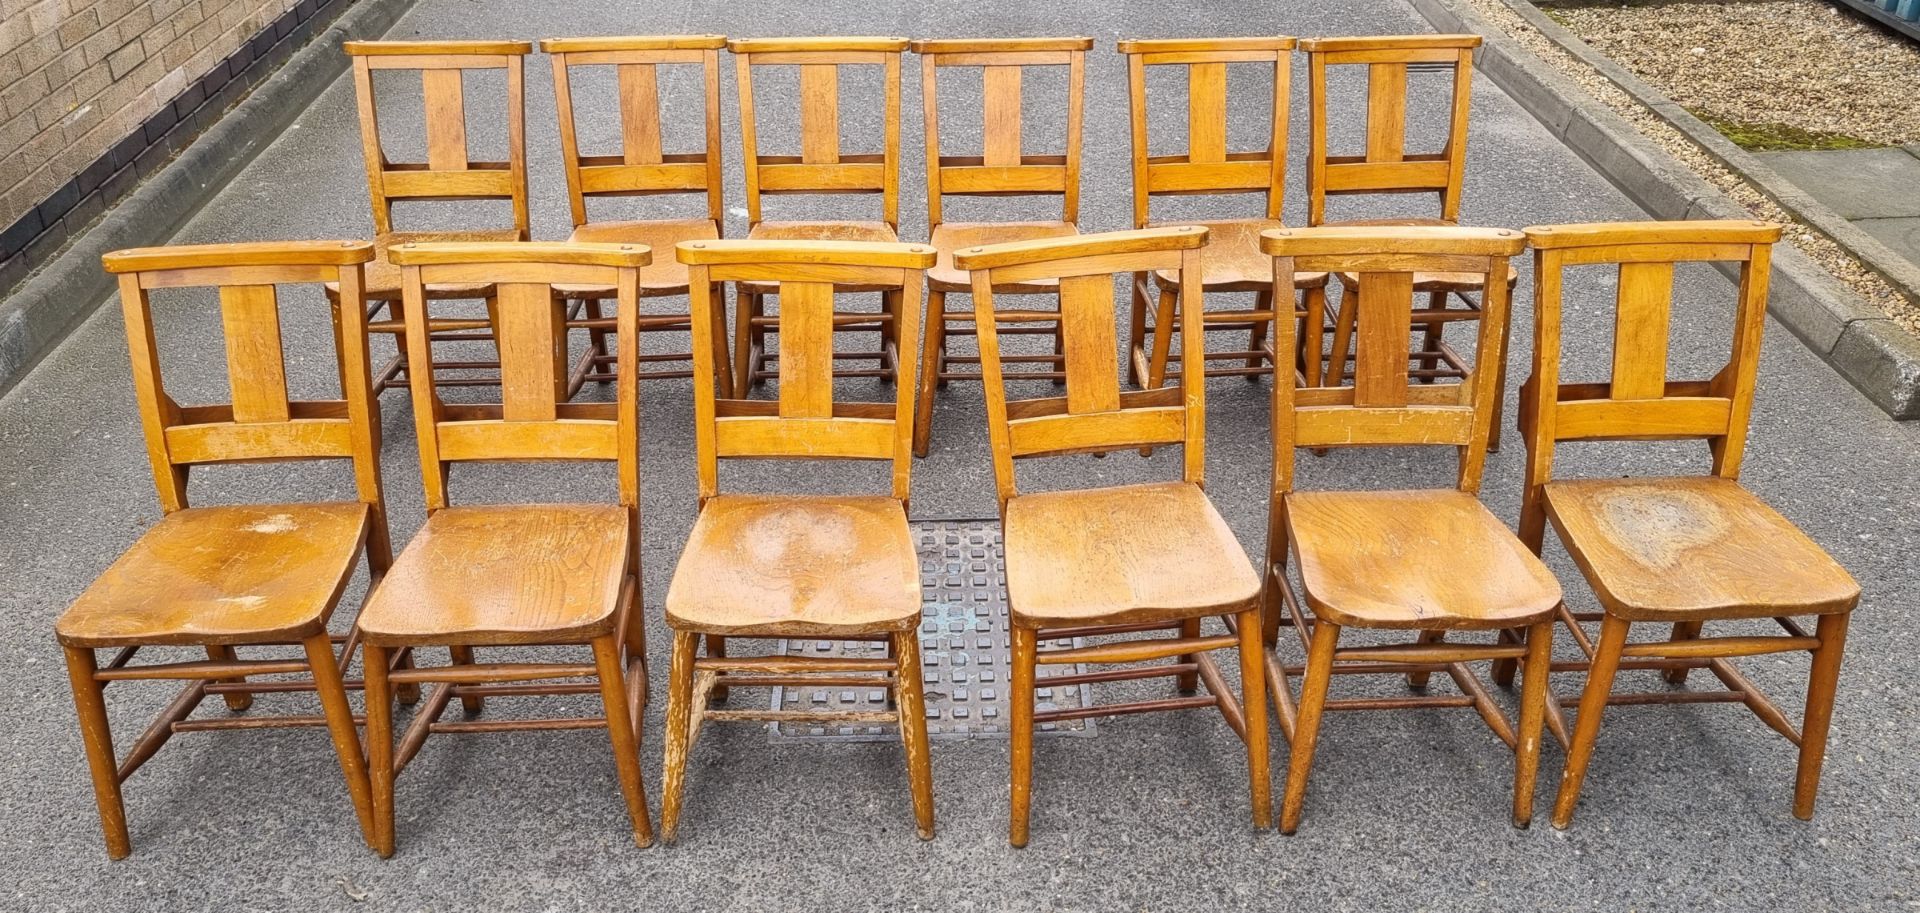 12x Wooden chairs with rear book holder - L 420 x W 420 x H 820mm - Image 2 of 10